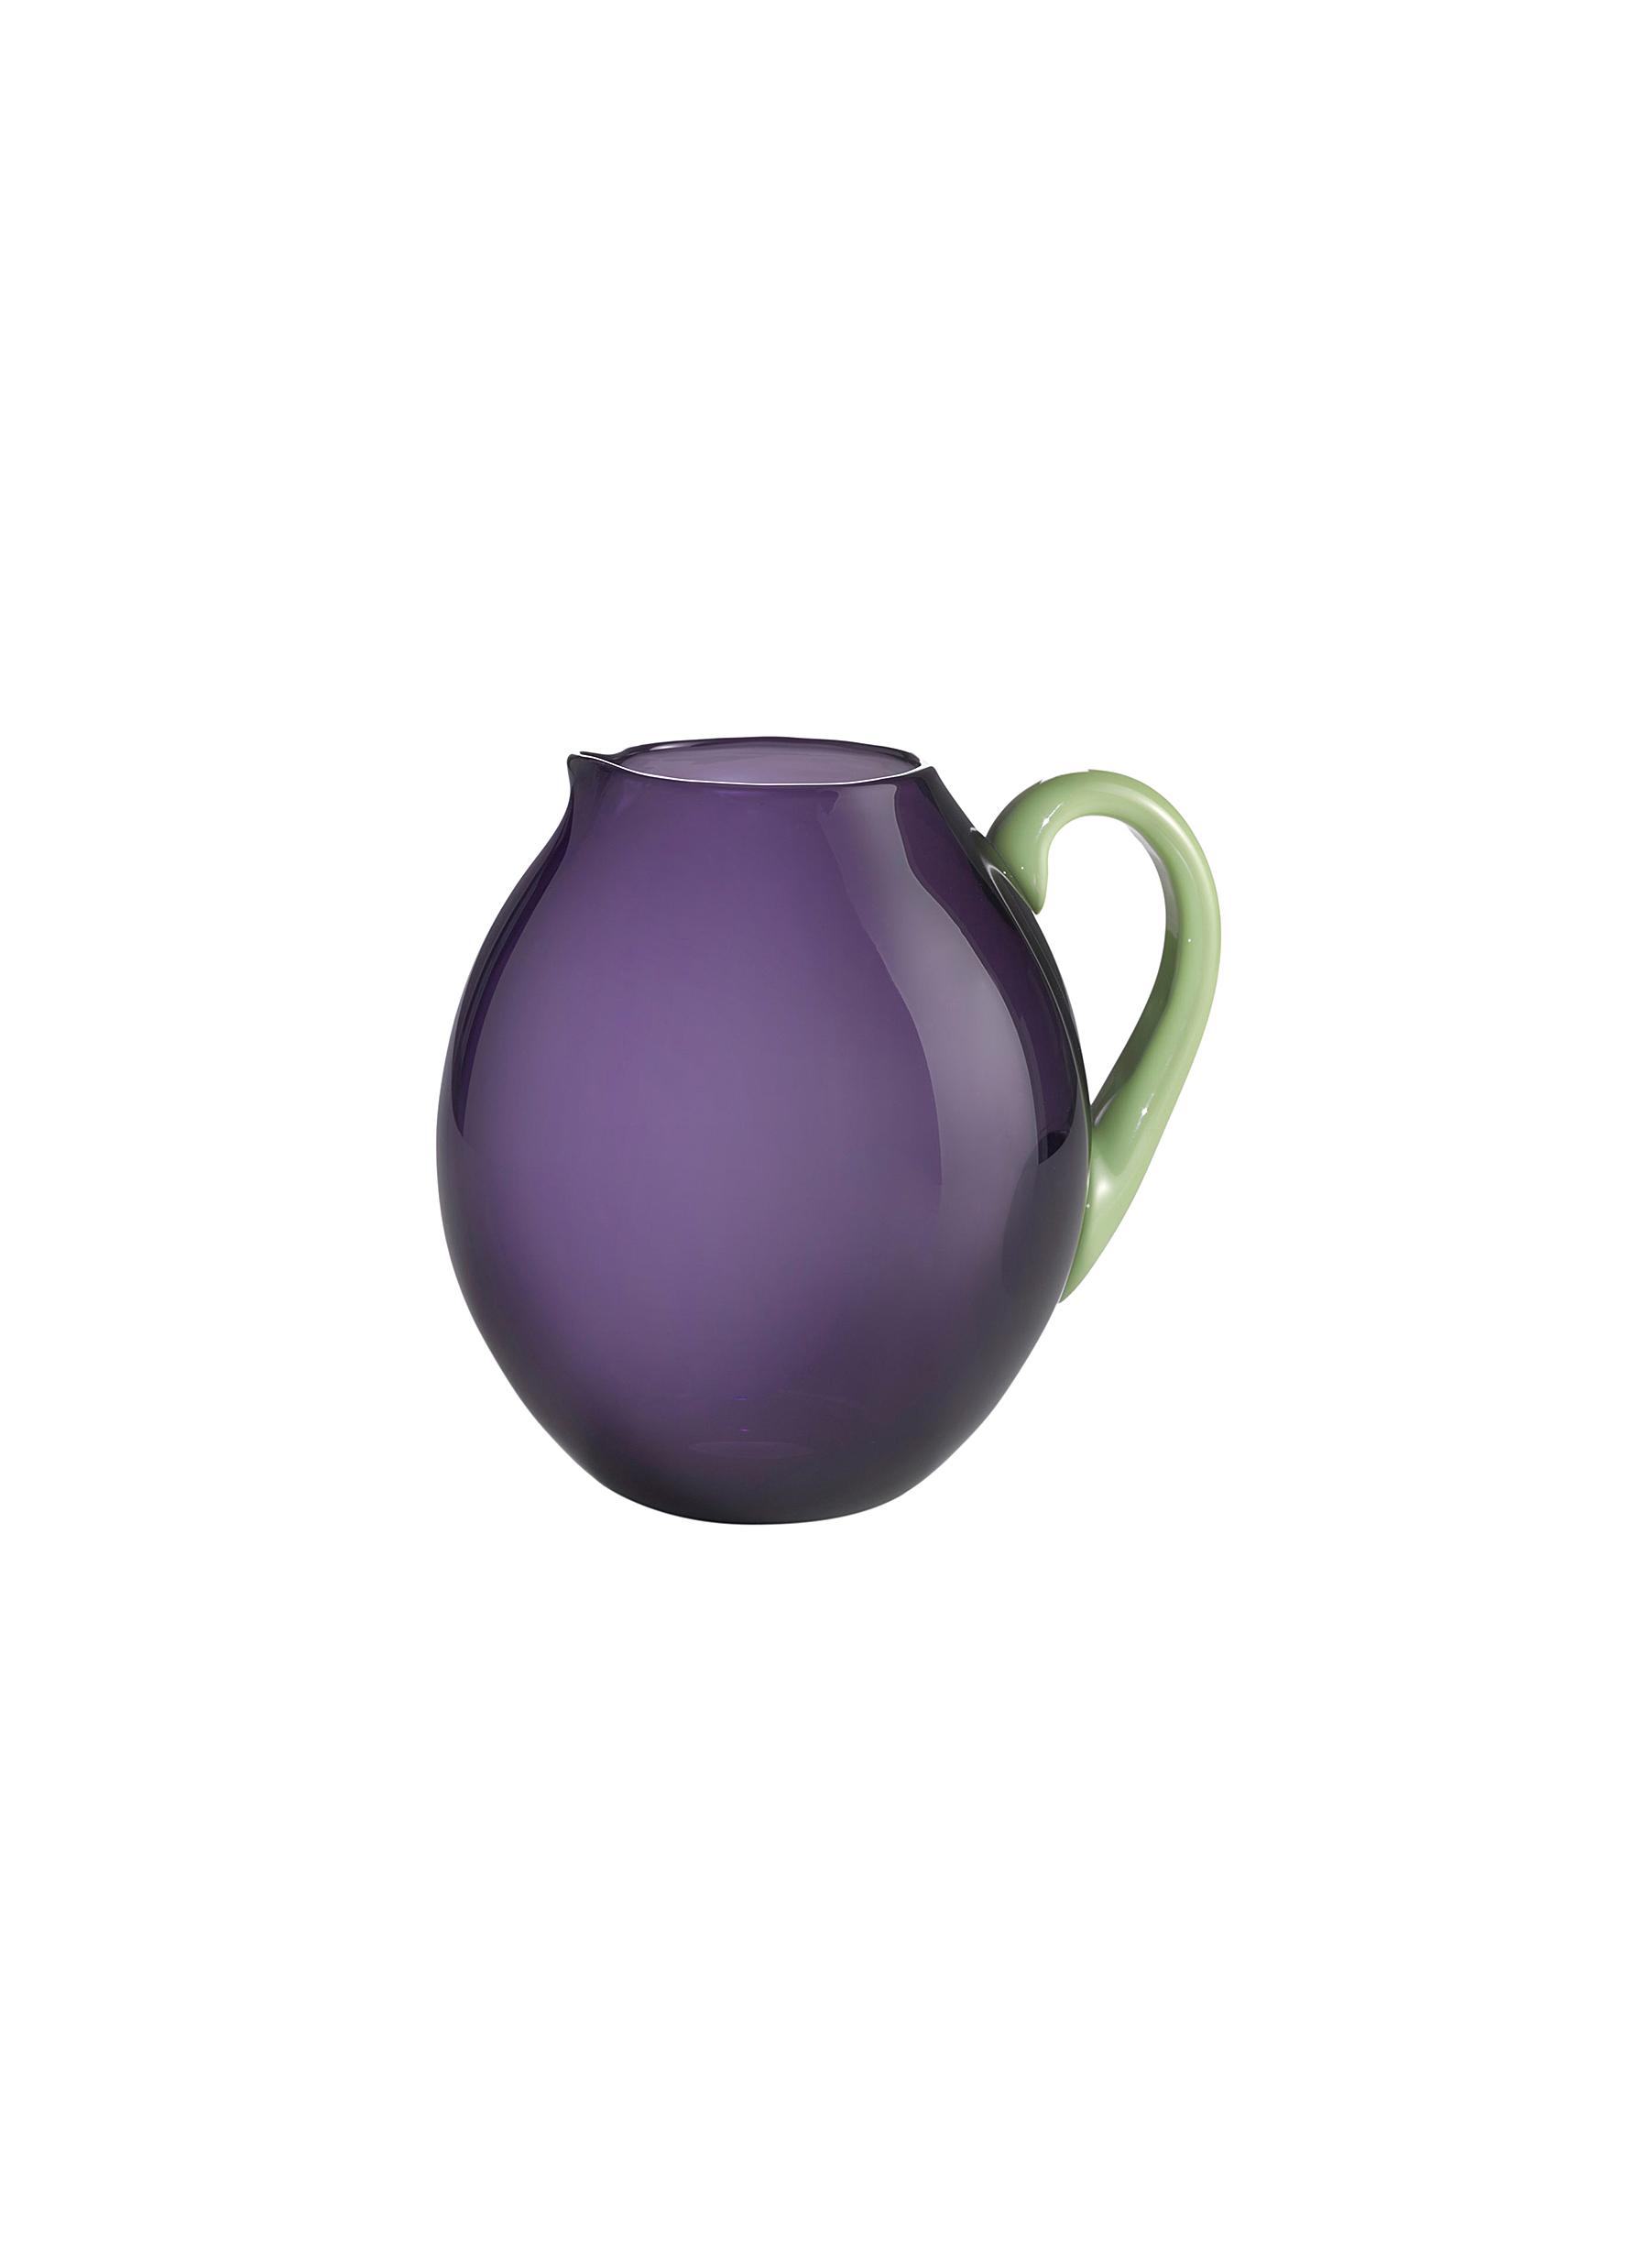 Dandy Glass Pitcher - Green/Periwinkle